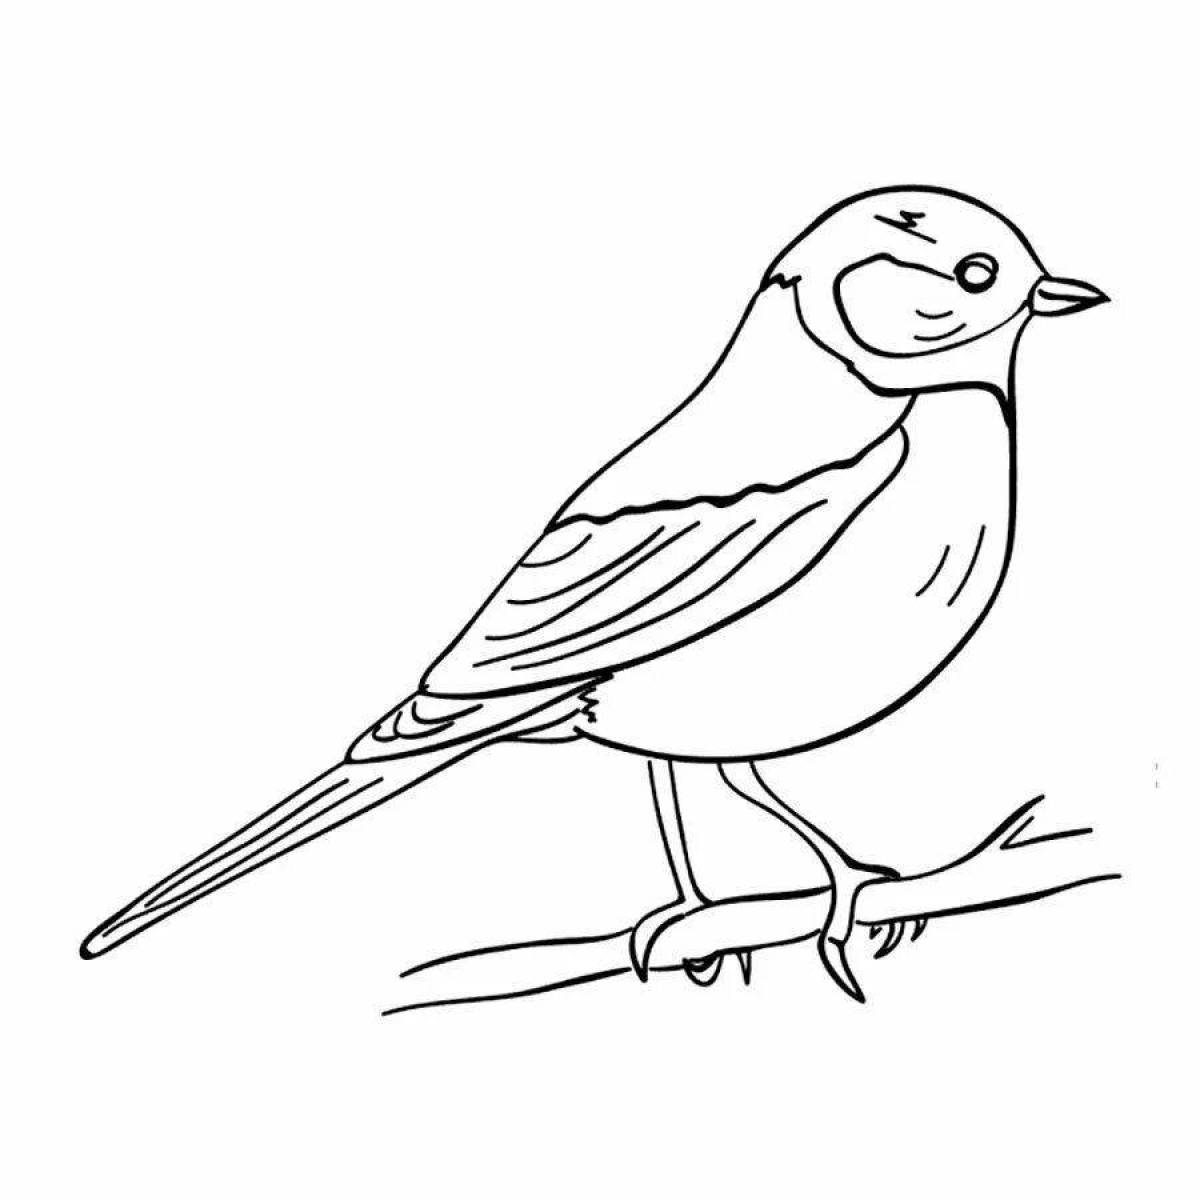 Amazing drawing of a bullfinch for kids